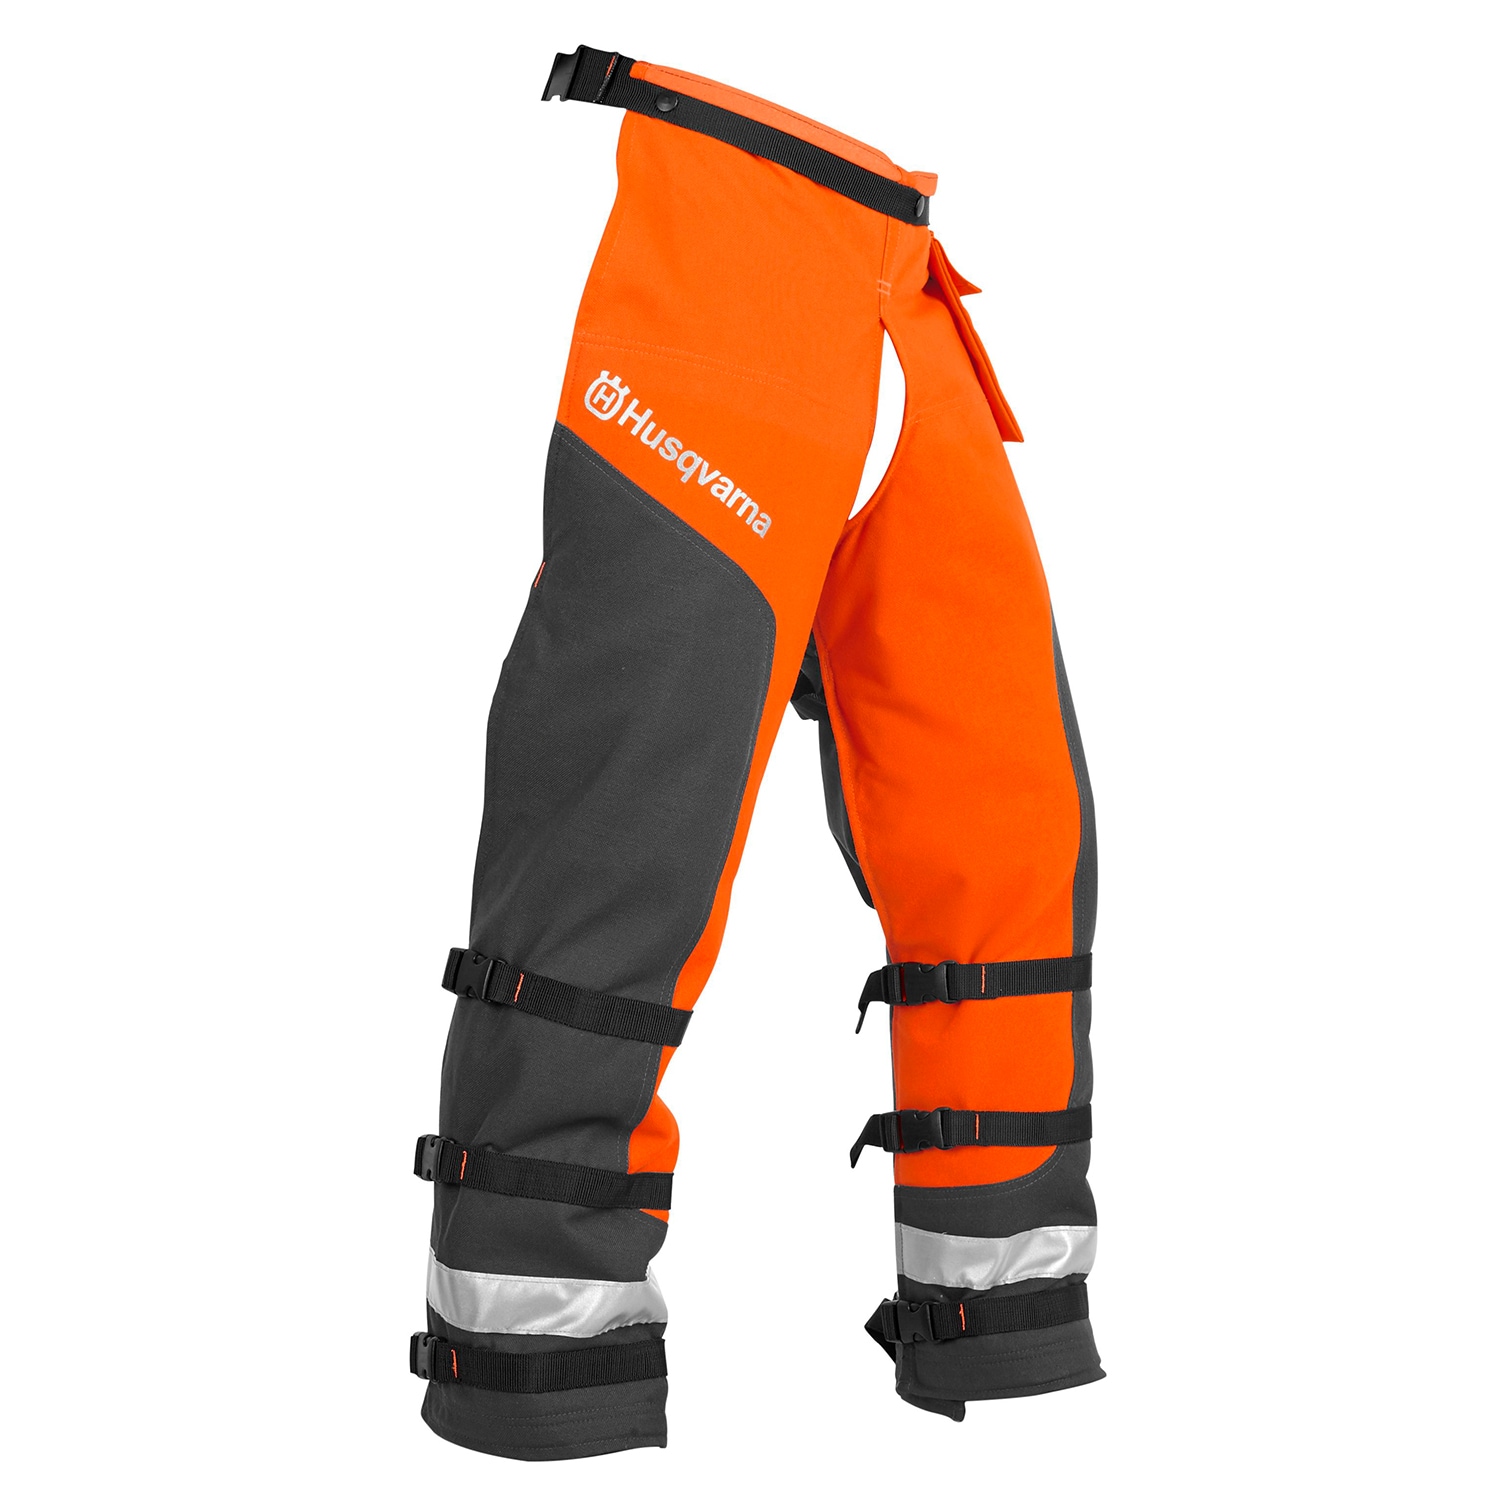 Clogger Chainsaw Trousers  Chaps  Cooler  Safer  Easier to Work In